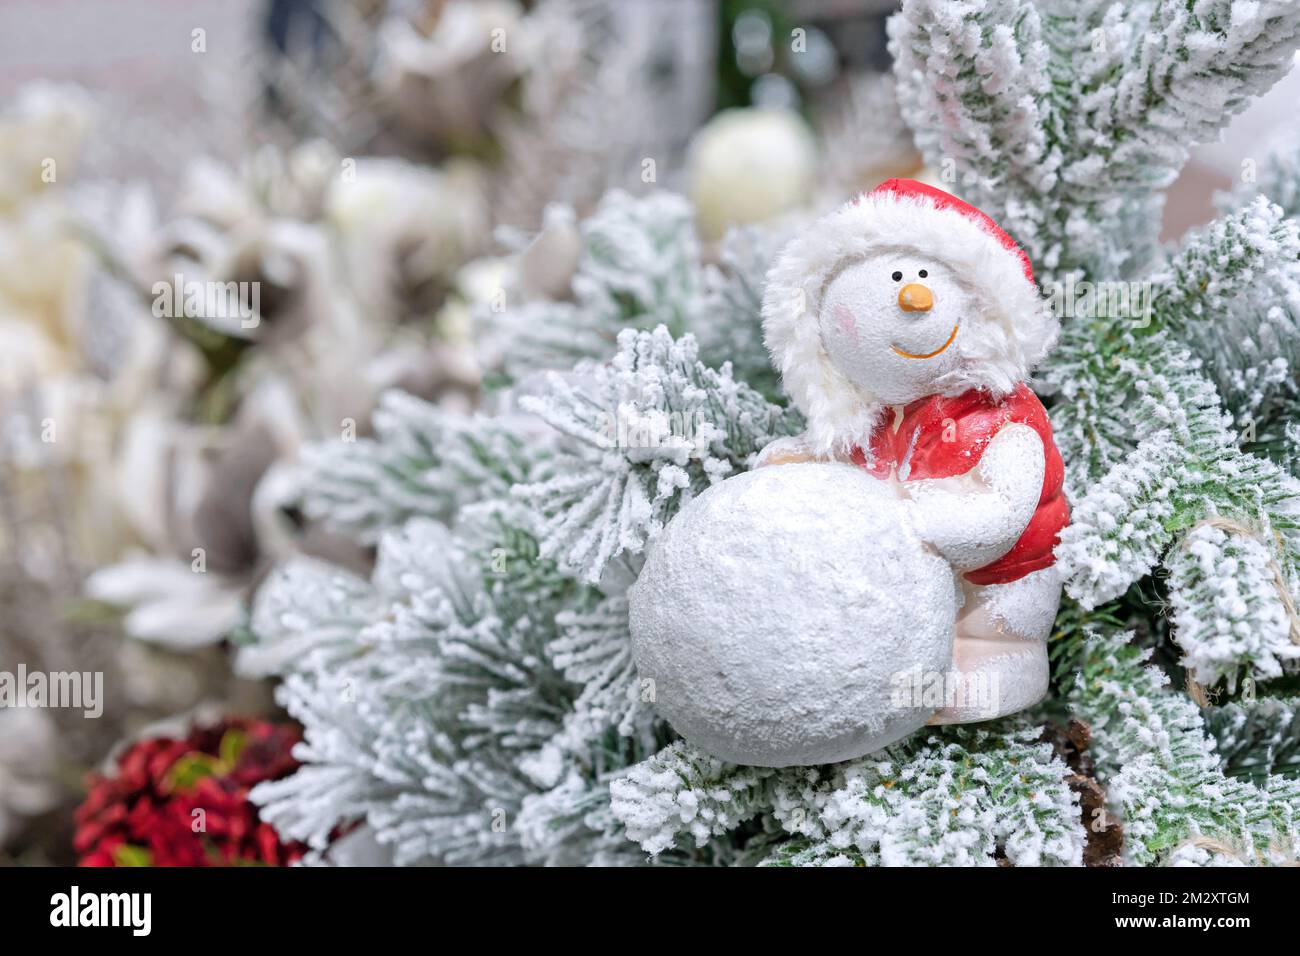 Snowman in a red jacket with a hood and a big snowball on the snow-covered christmas tree. Stock Photo